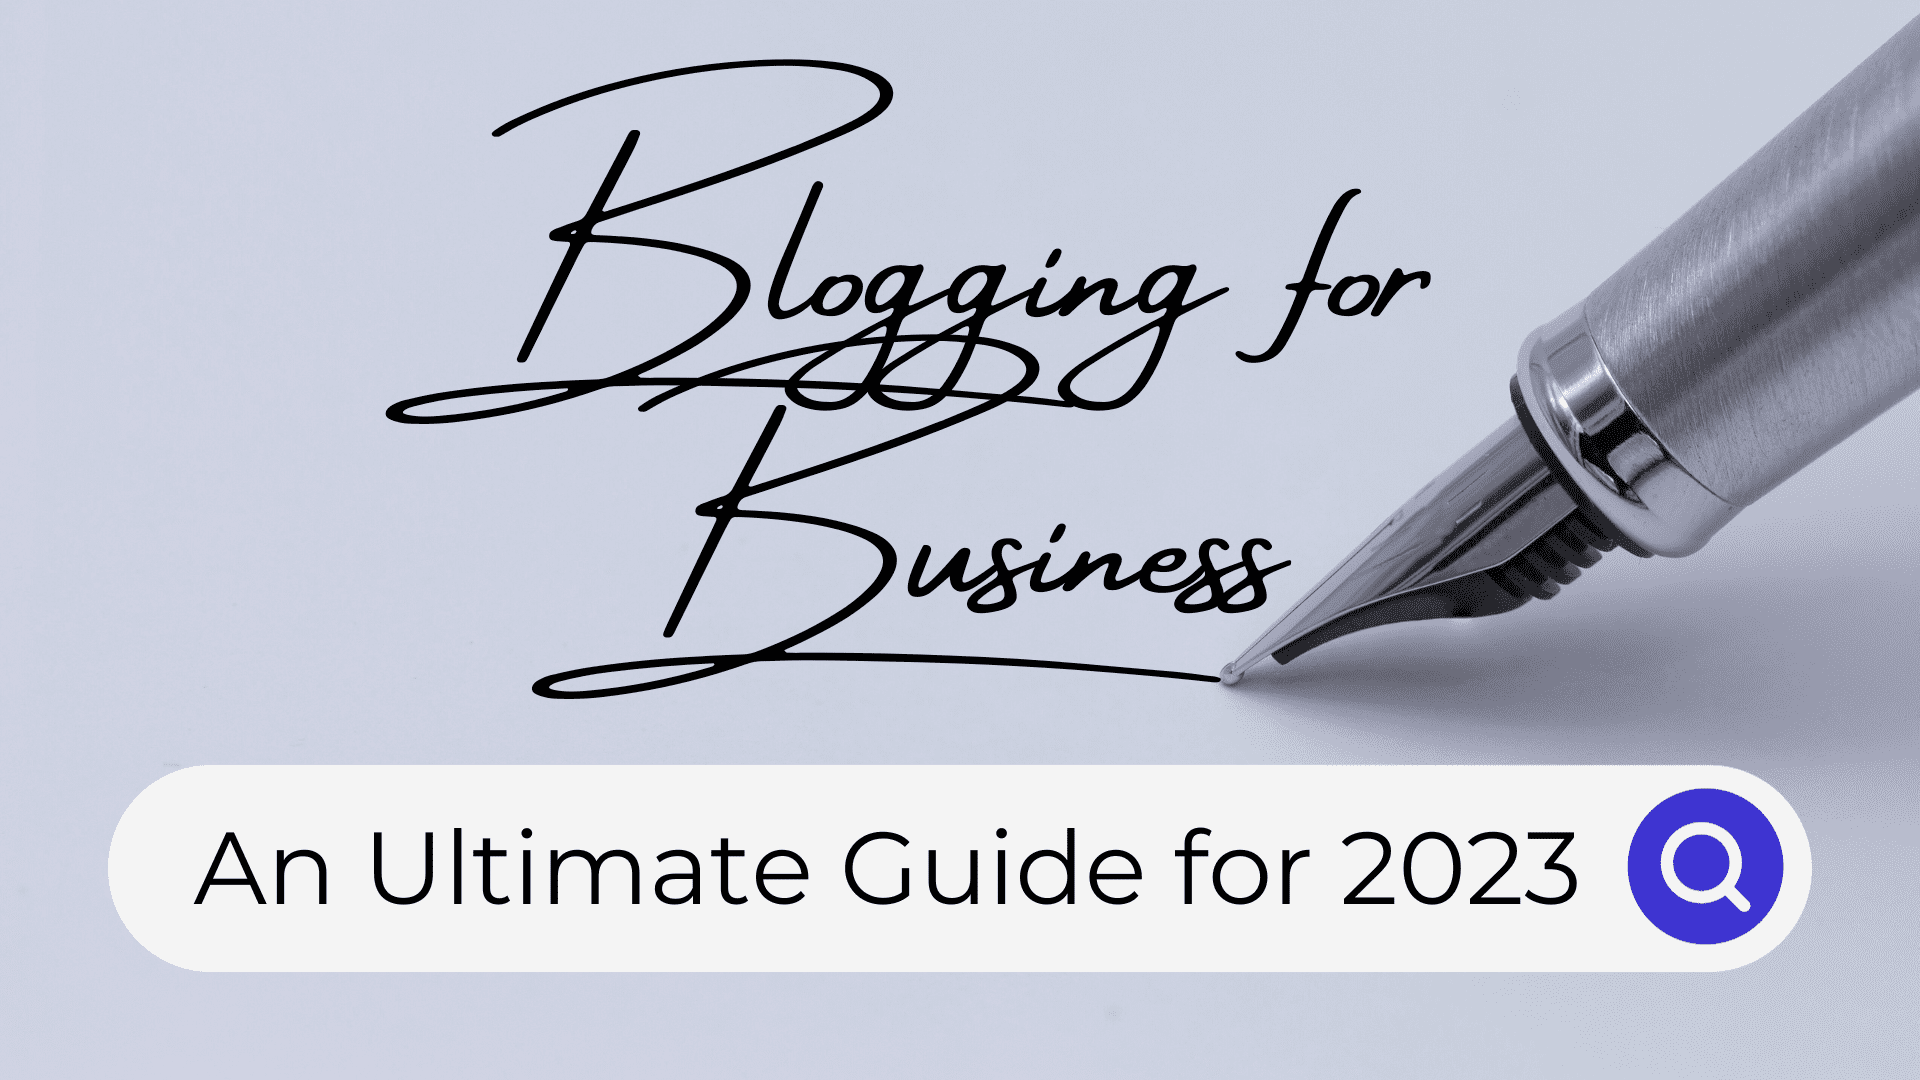 Blogging for business featured image